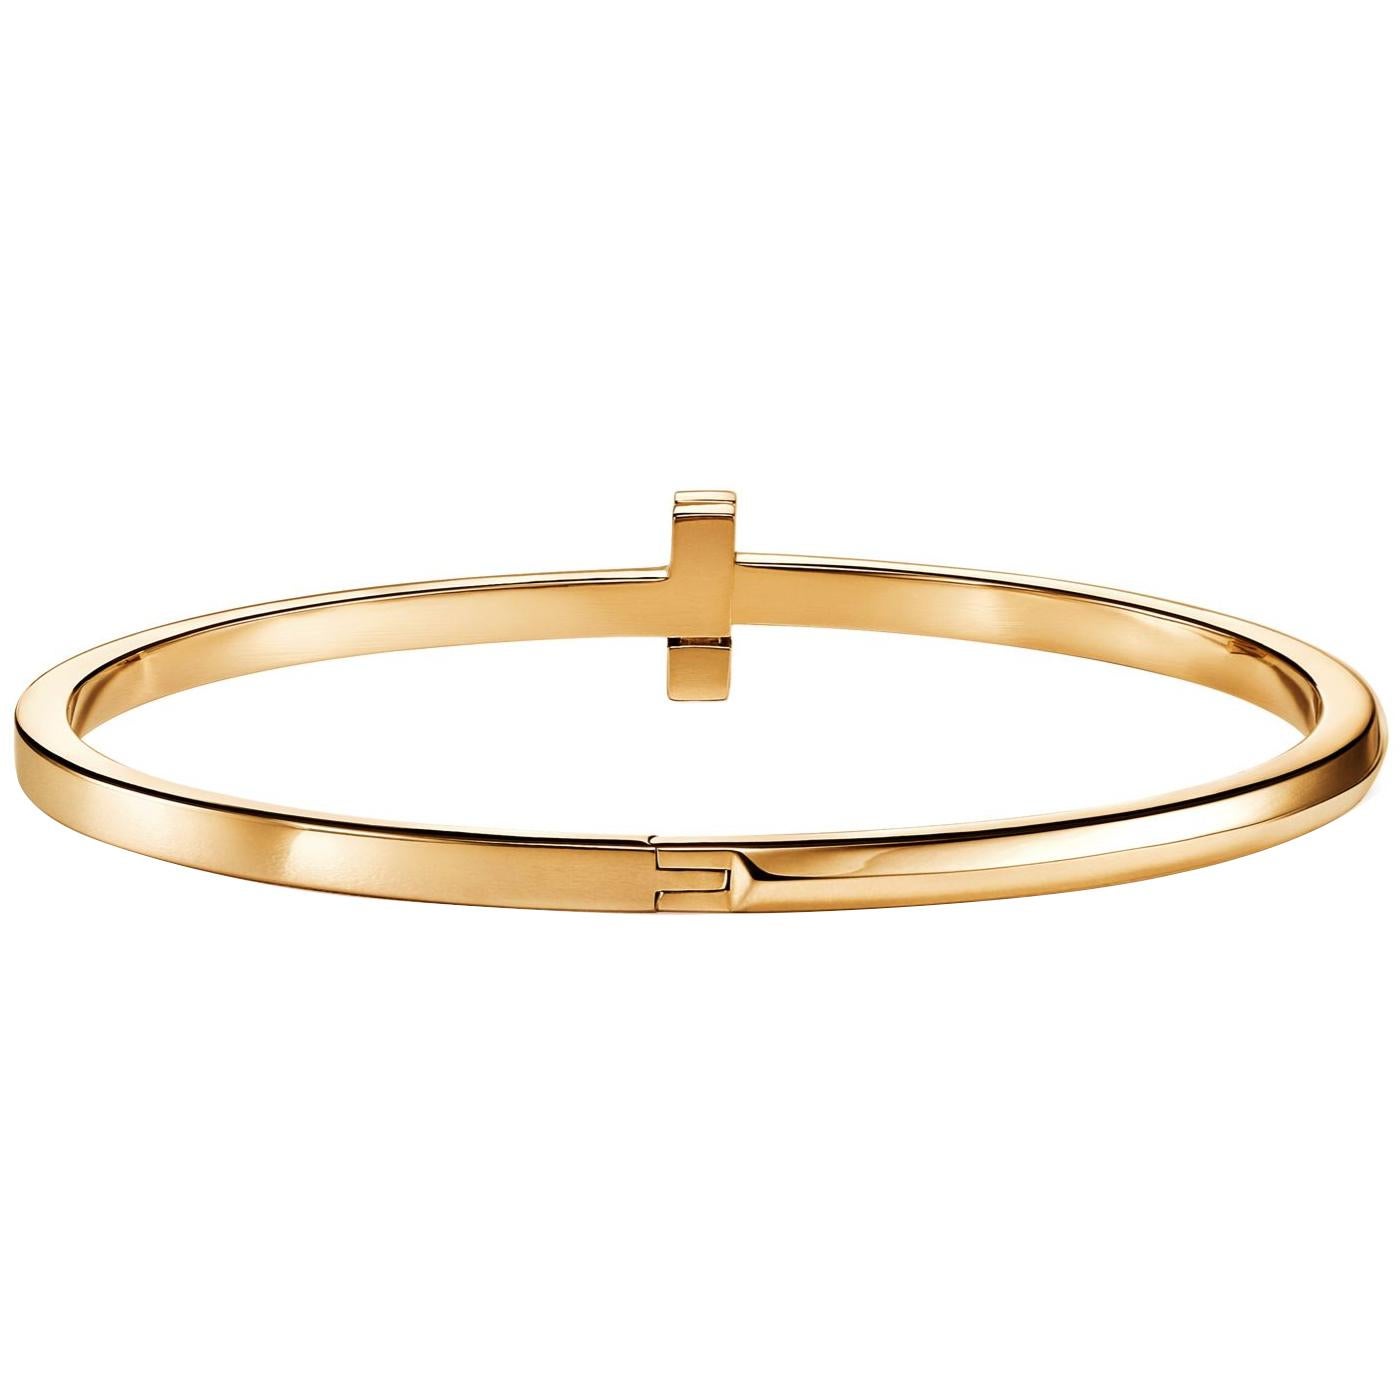 Tiffany & Co T T1 Narrow Hinged Bangle in 18k Gold Medium Size In Good Condition For Sale In Aventura, FL